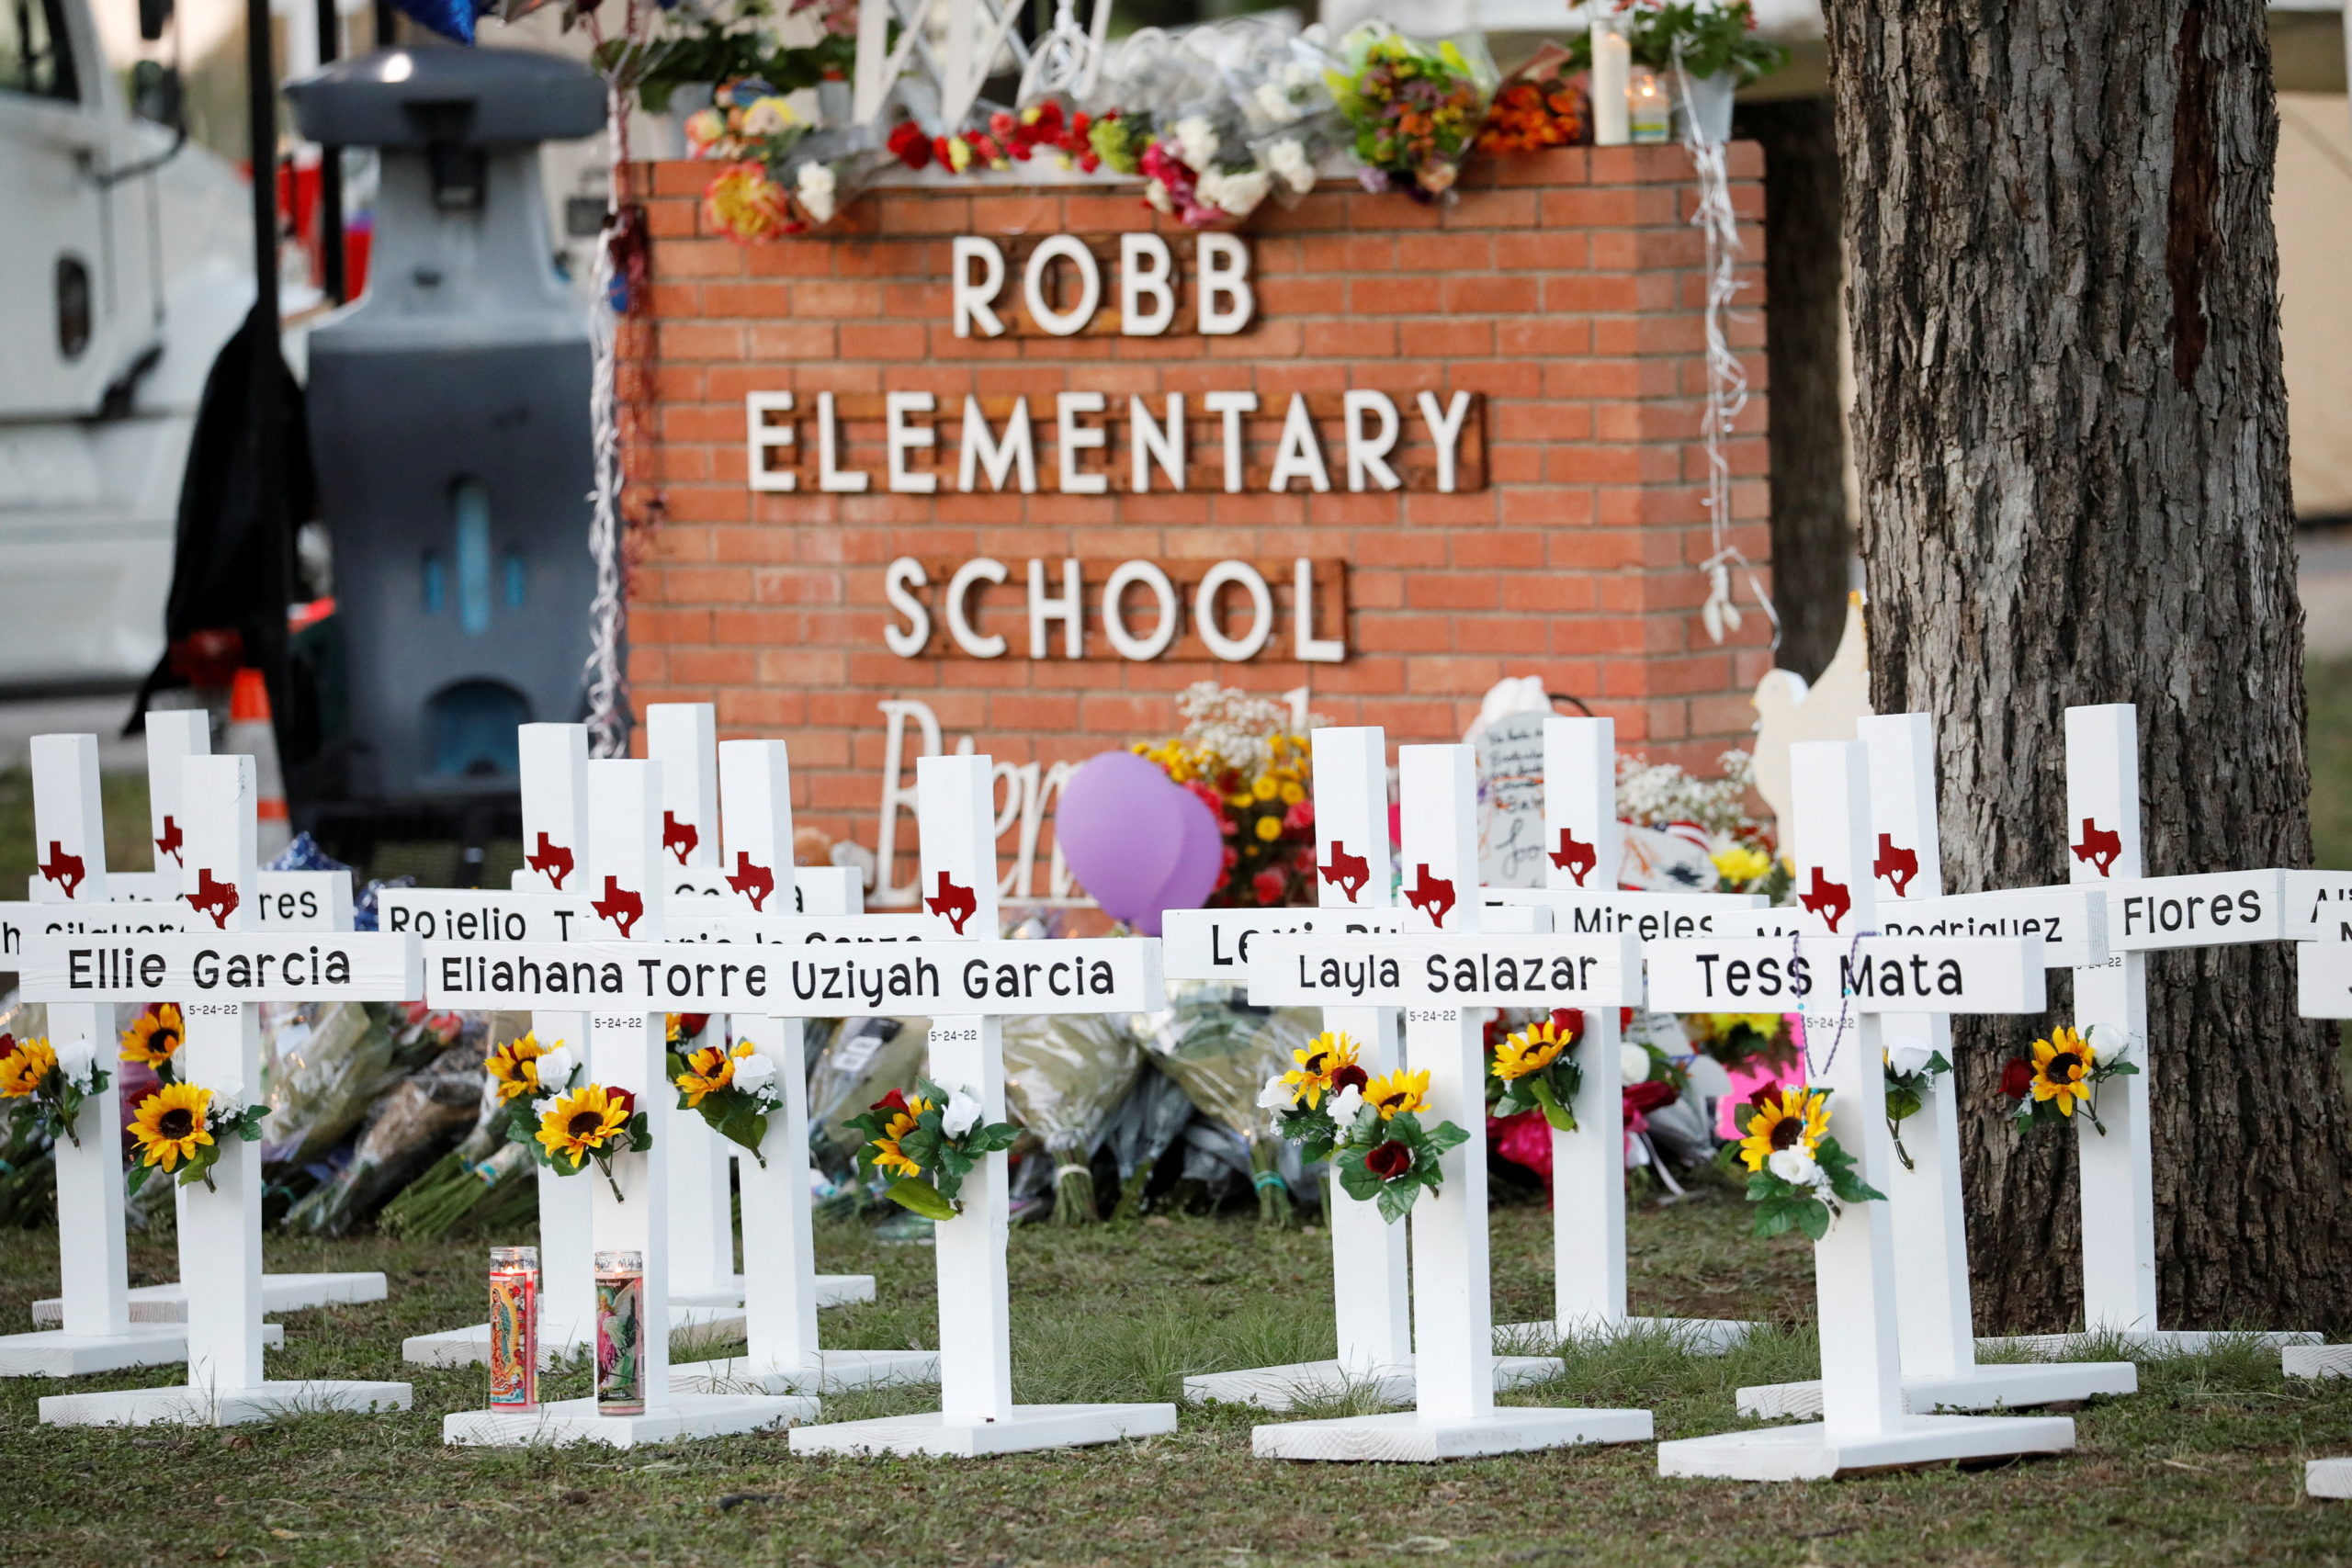 Crosses with the names of victims of a school shooting, are pictured at a memorial outside Robb Elementary school, after a gunman killed nineteen children and two teachers, in Uvalde, Texas, U.S. May 26, 2022. REUTERS/Marco Bello